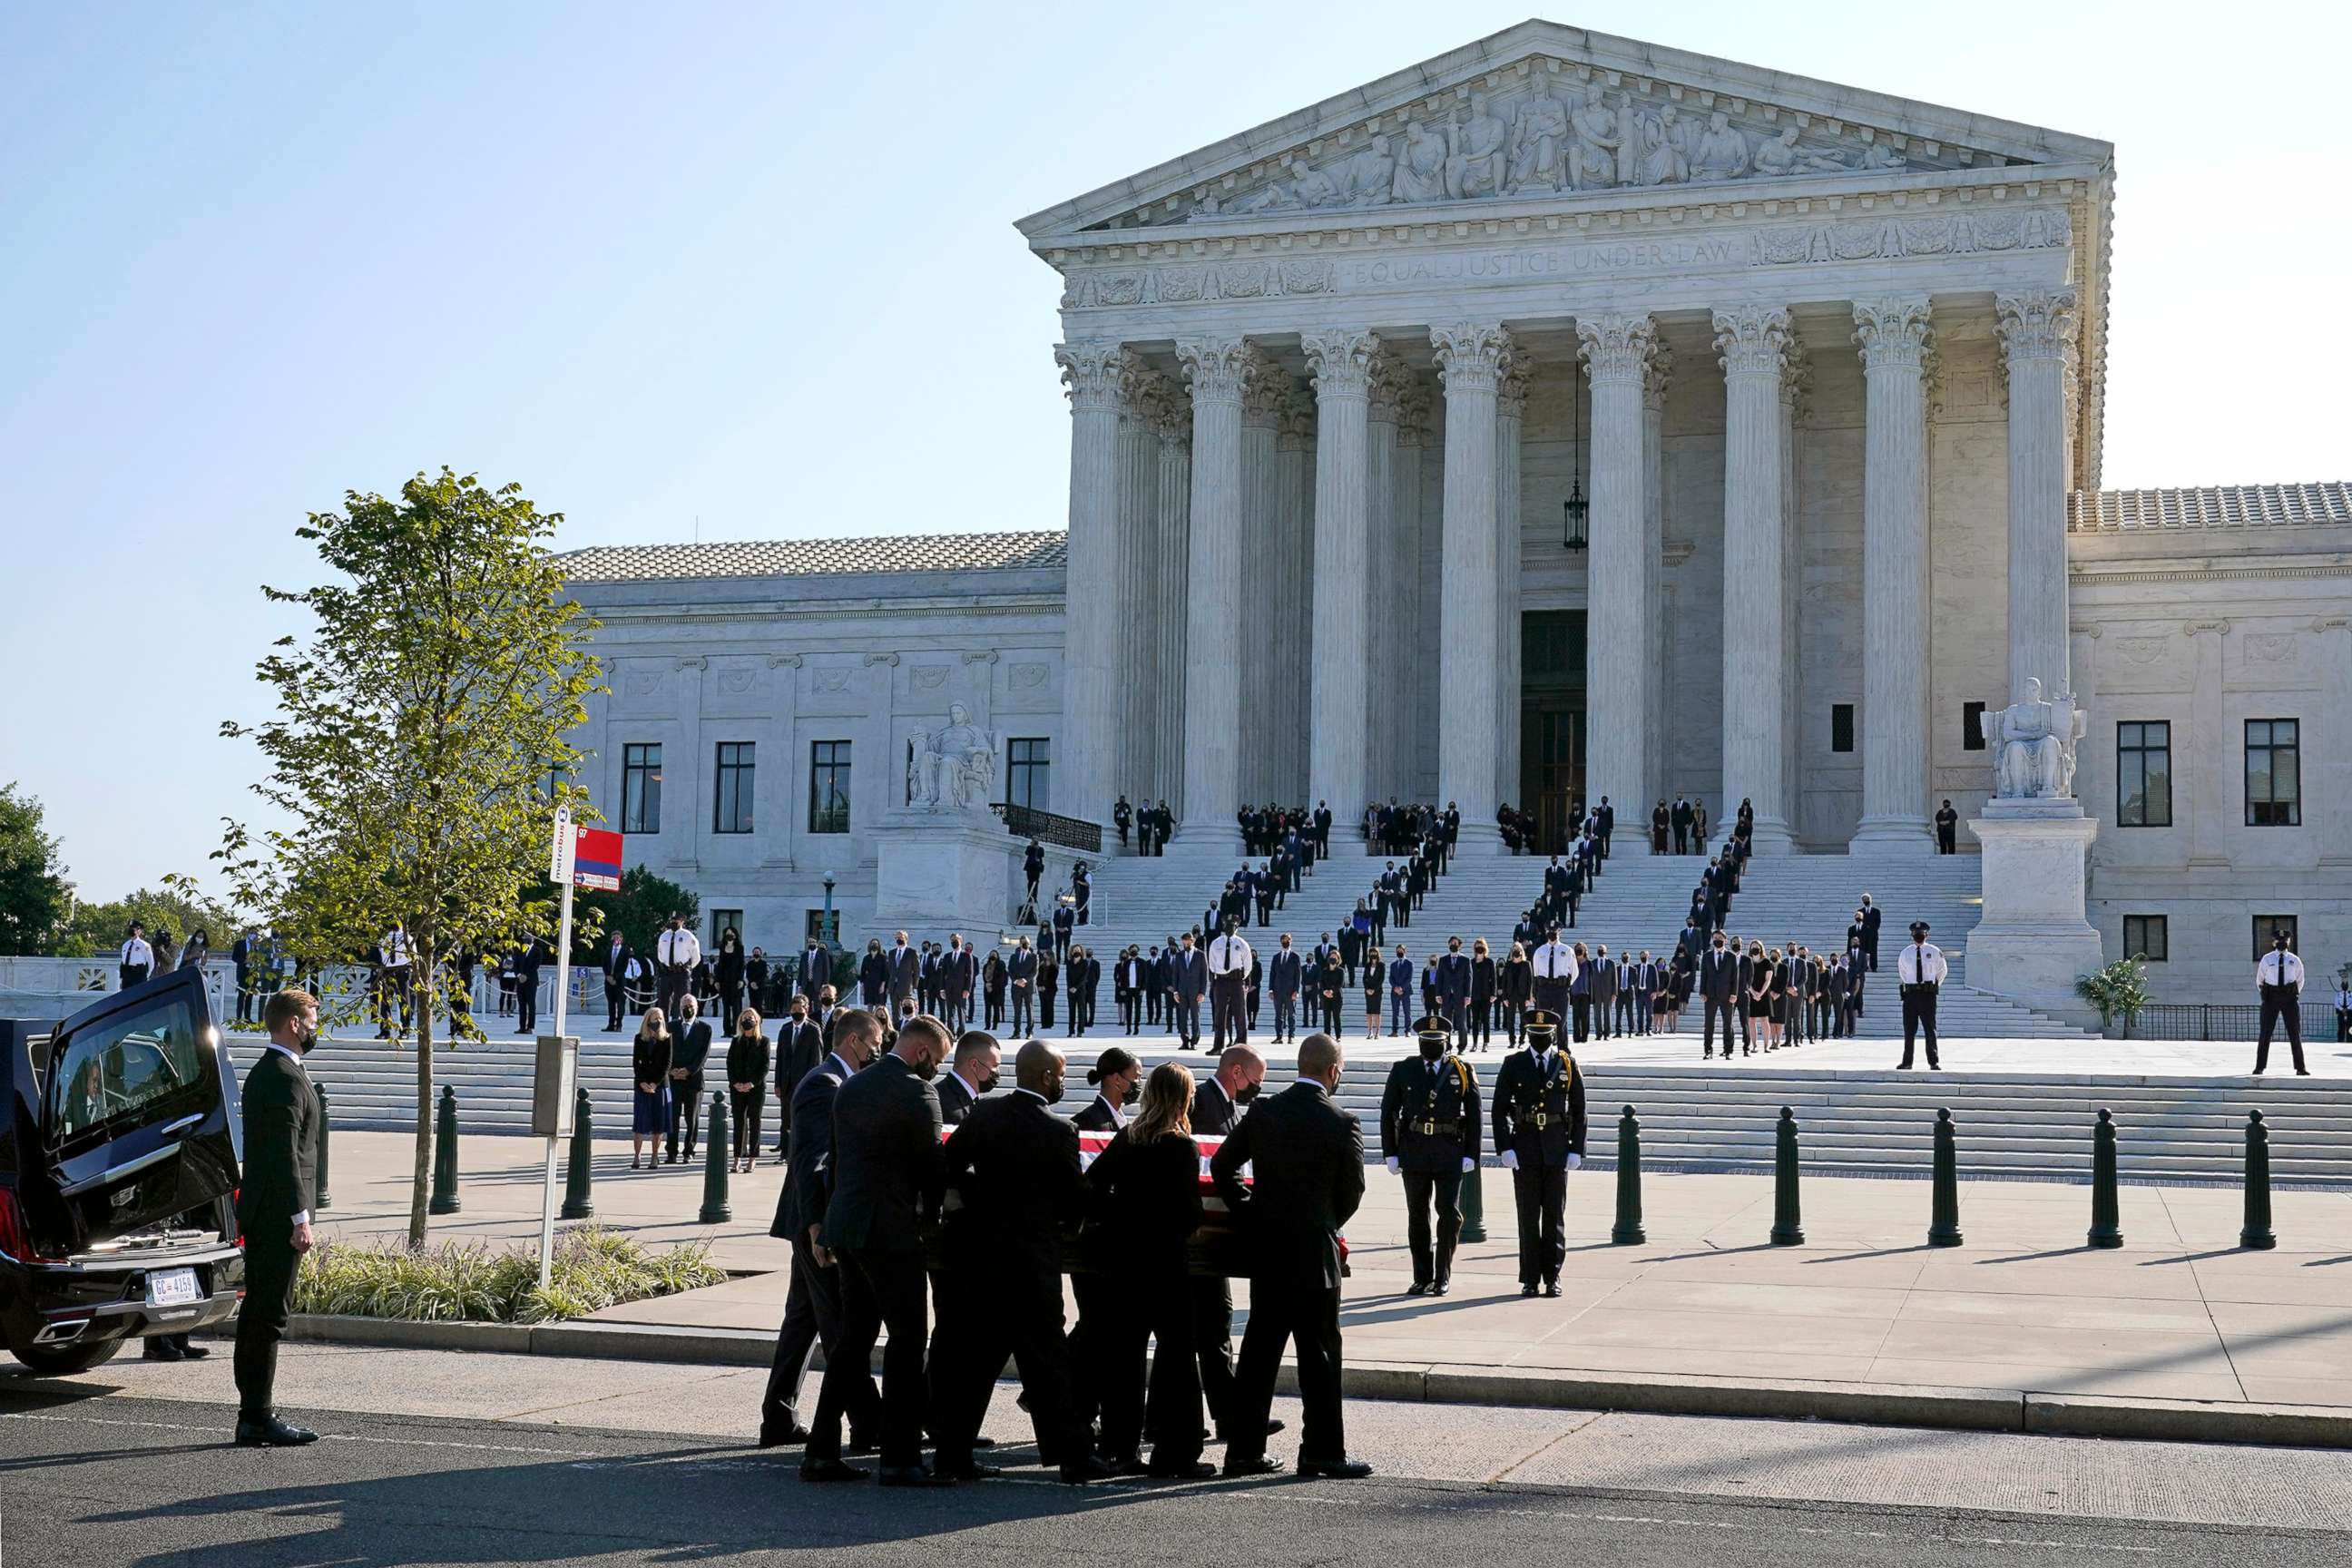 PHOTO: The flag-draped casket of Justice Ruth Bader Ginsburg arrives at the Supreme Court in Washington, D.C., Sept. 23, 2020.